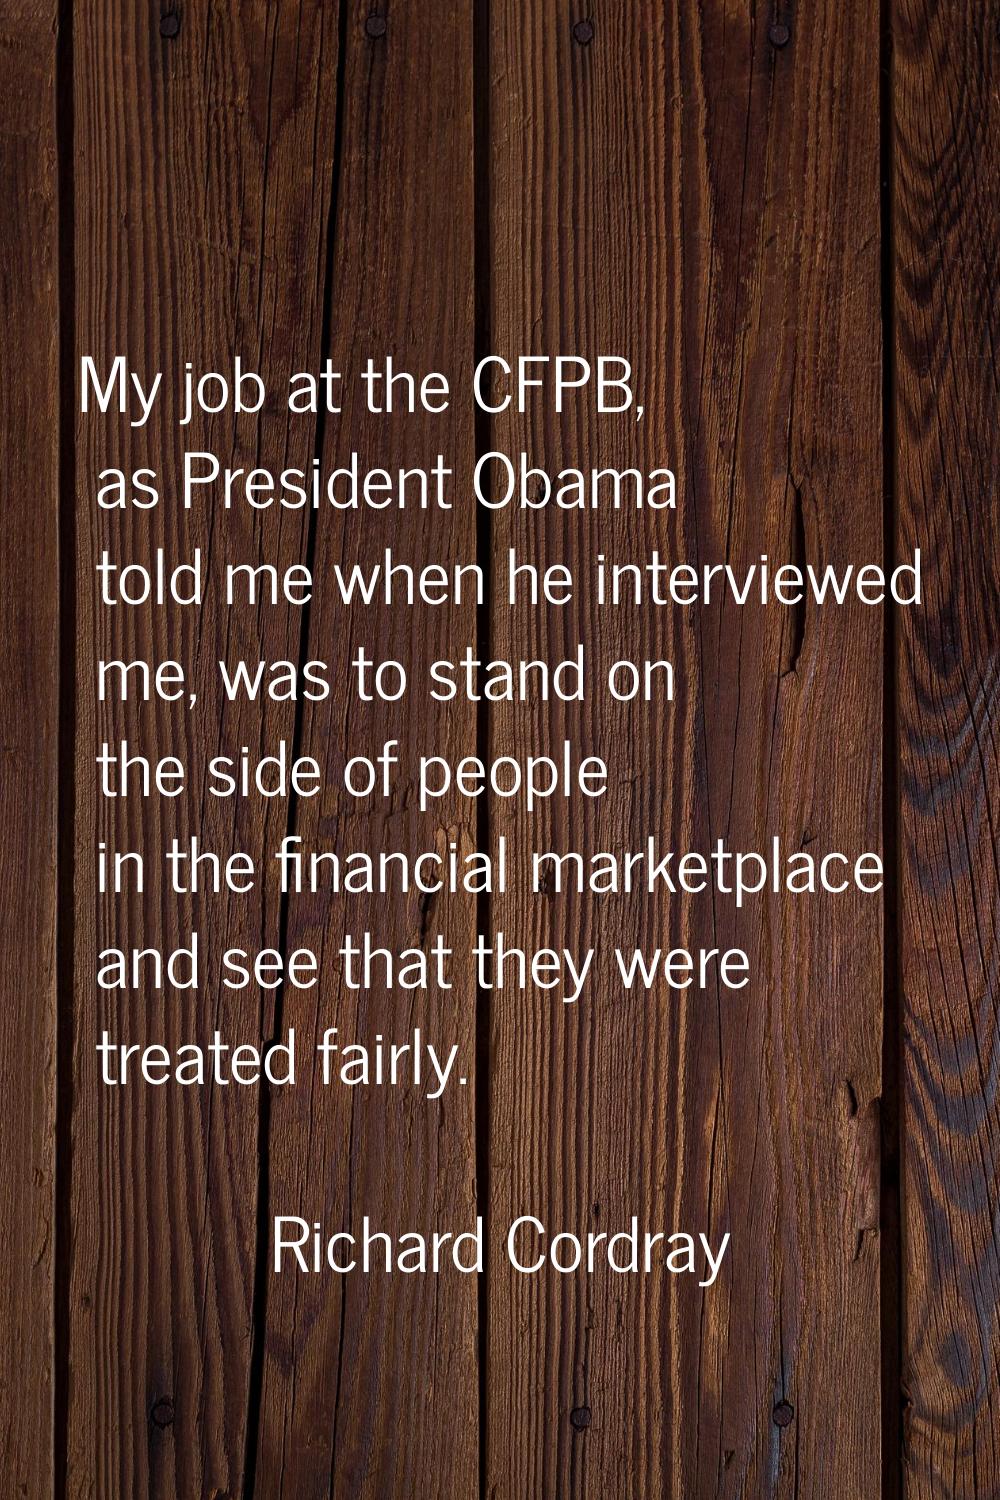 My job at the CFPB, as President Obama told me when he interviewed me, was to stand on the side of 